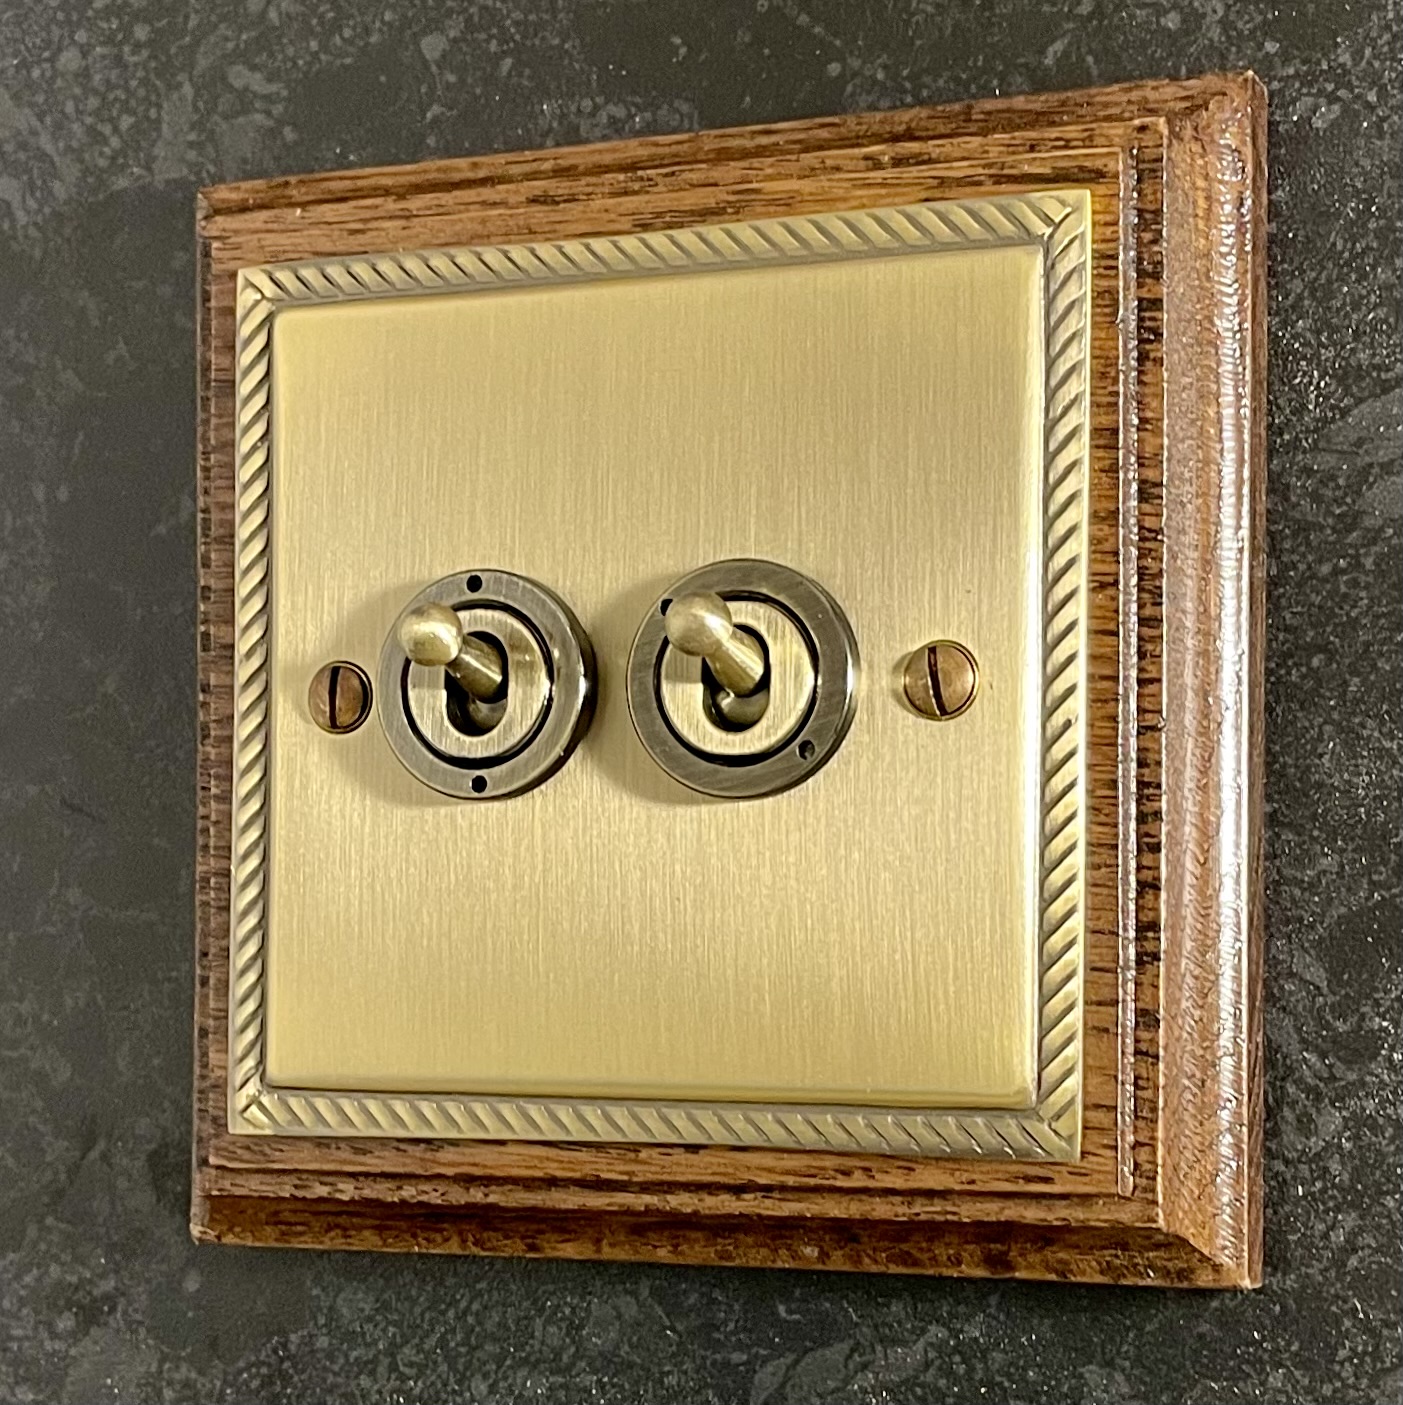 GFP202-  Georgian Flat Plate Doubler Toggle Switch 2 Way